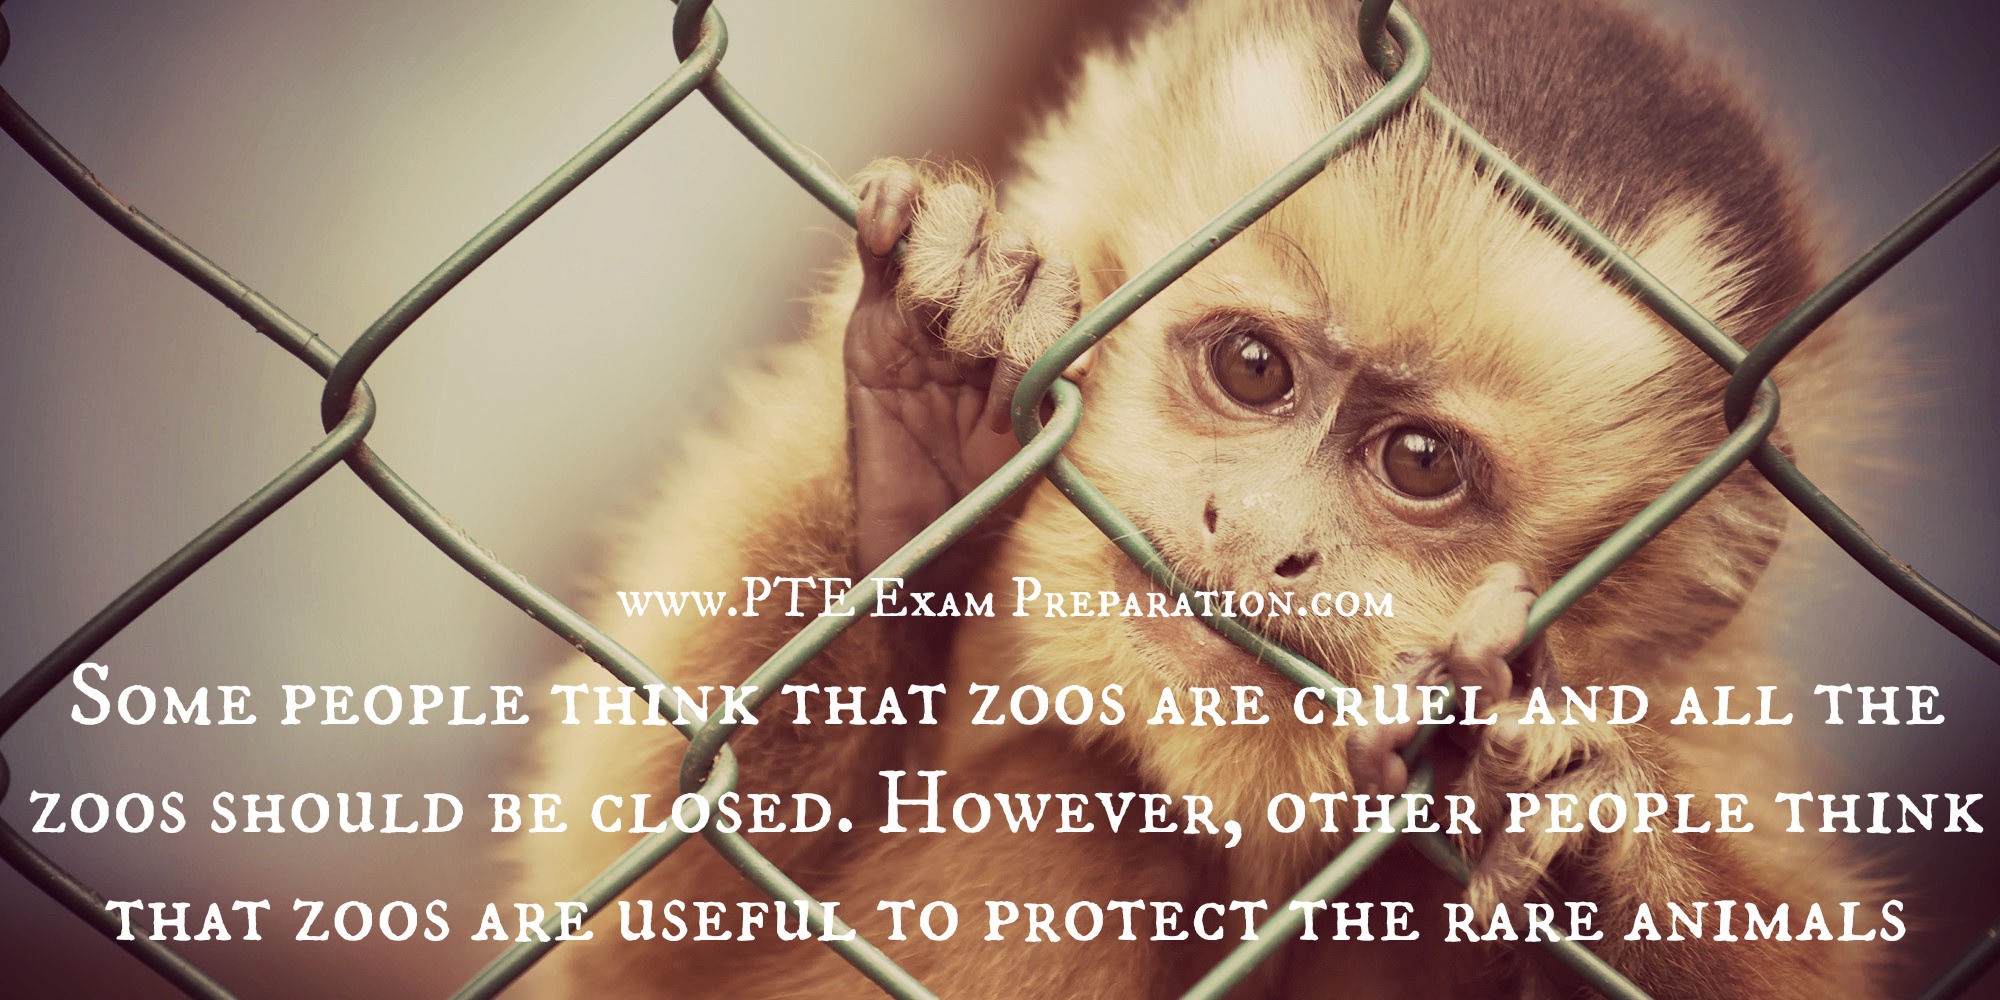 Some people think that zoos are cruel and all the zoos should be closed